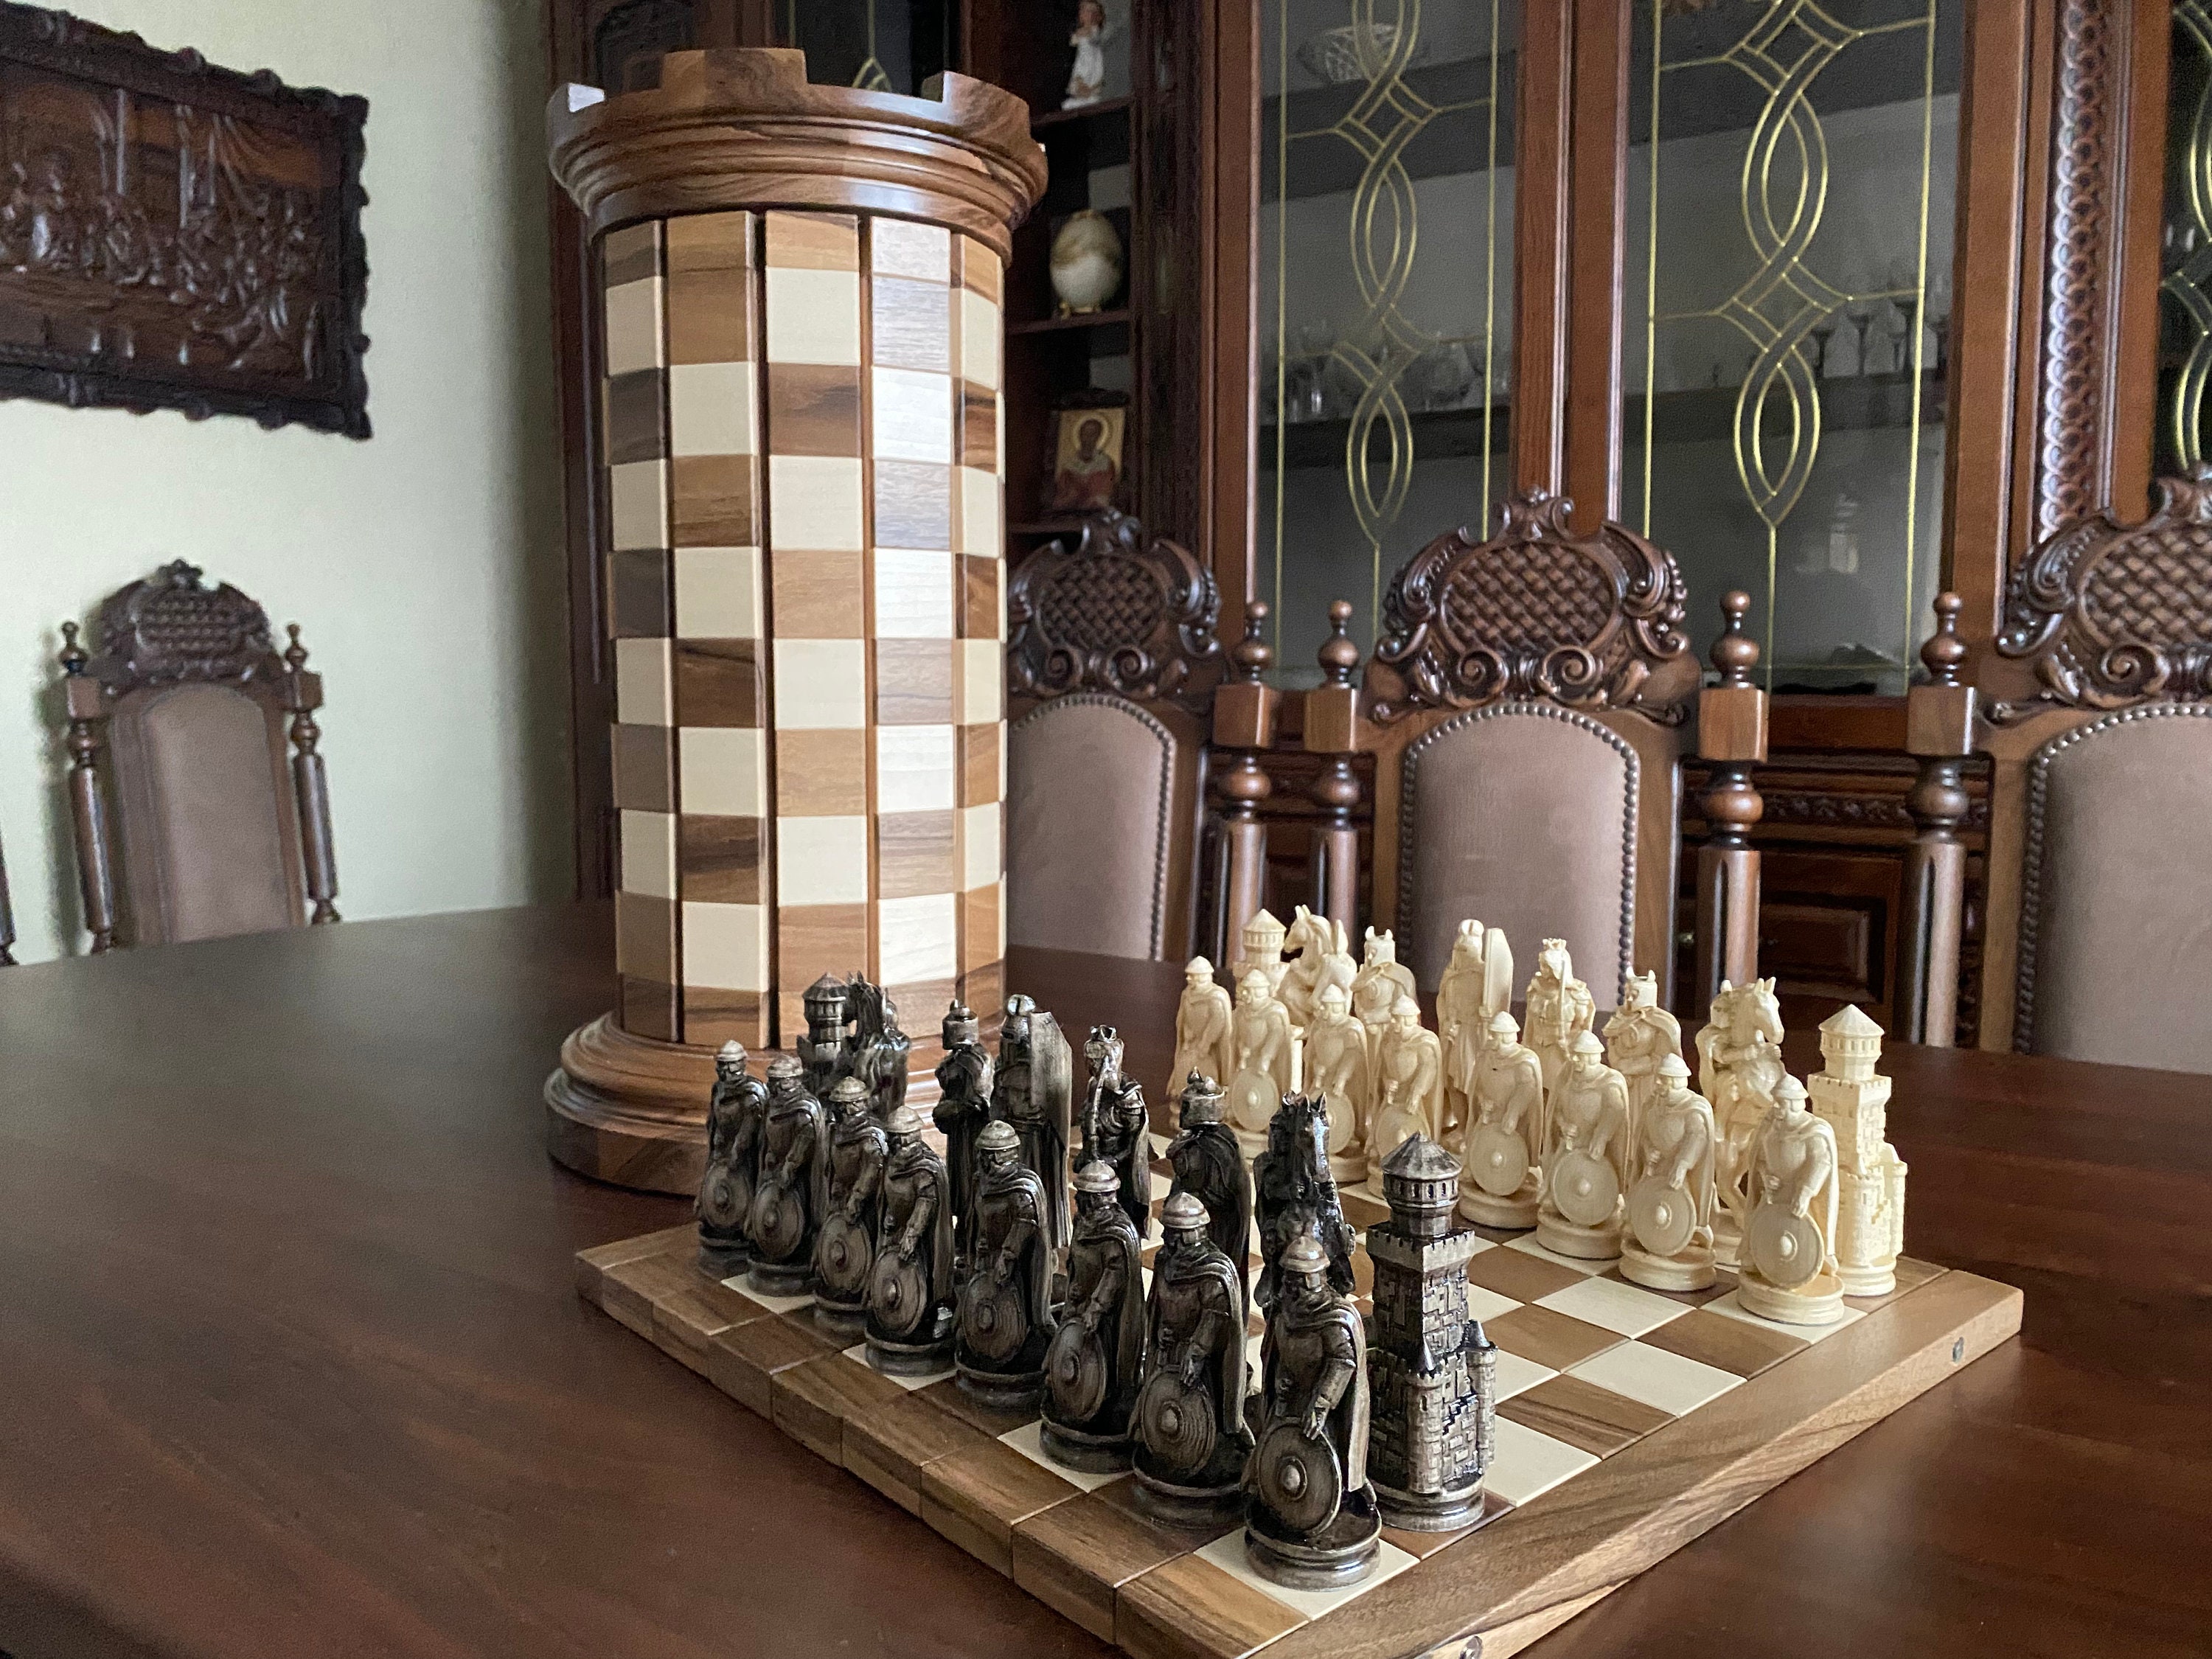 medieval chess pieces fighting with swords, hd, art